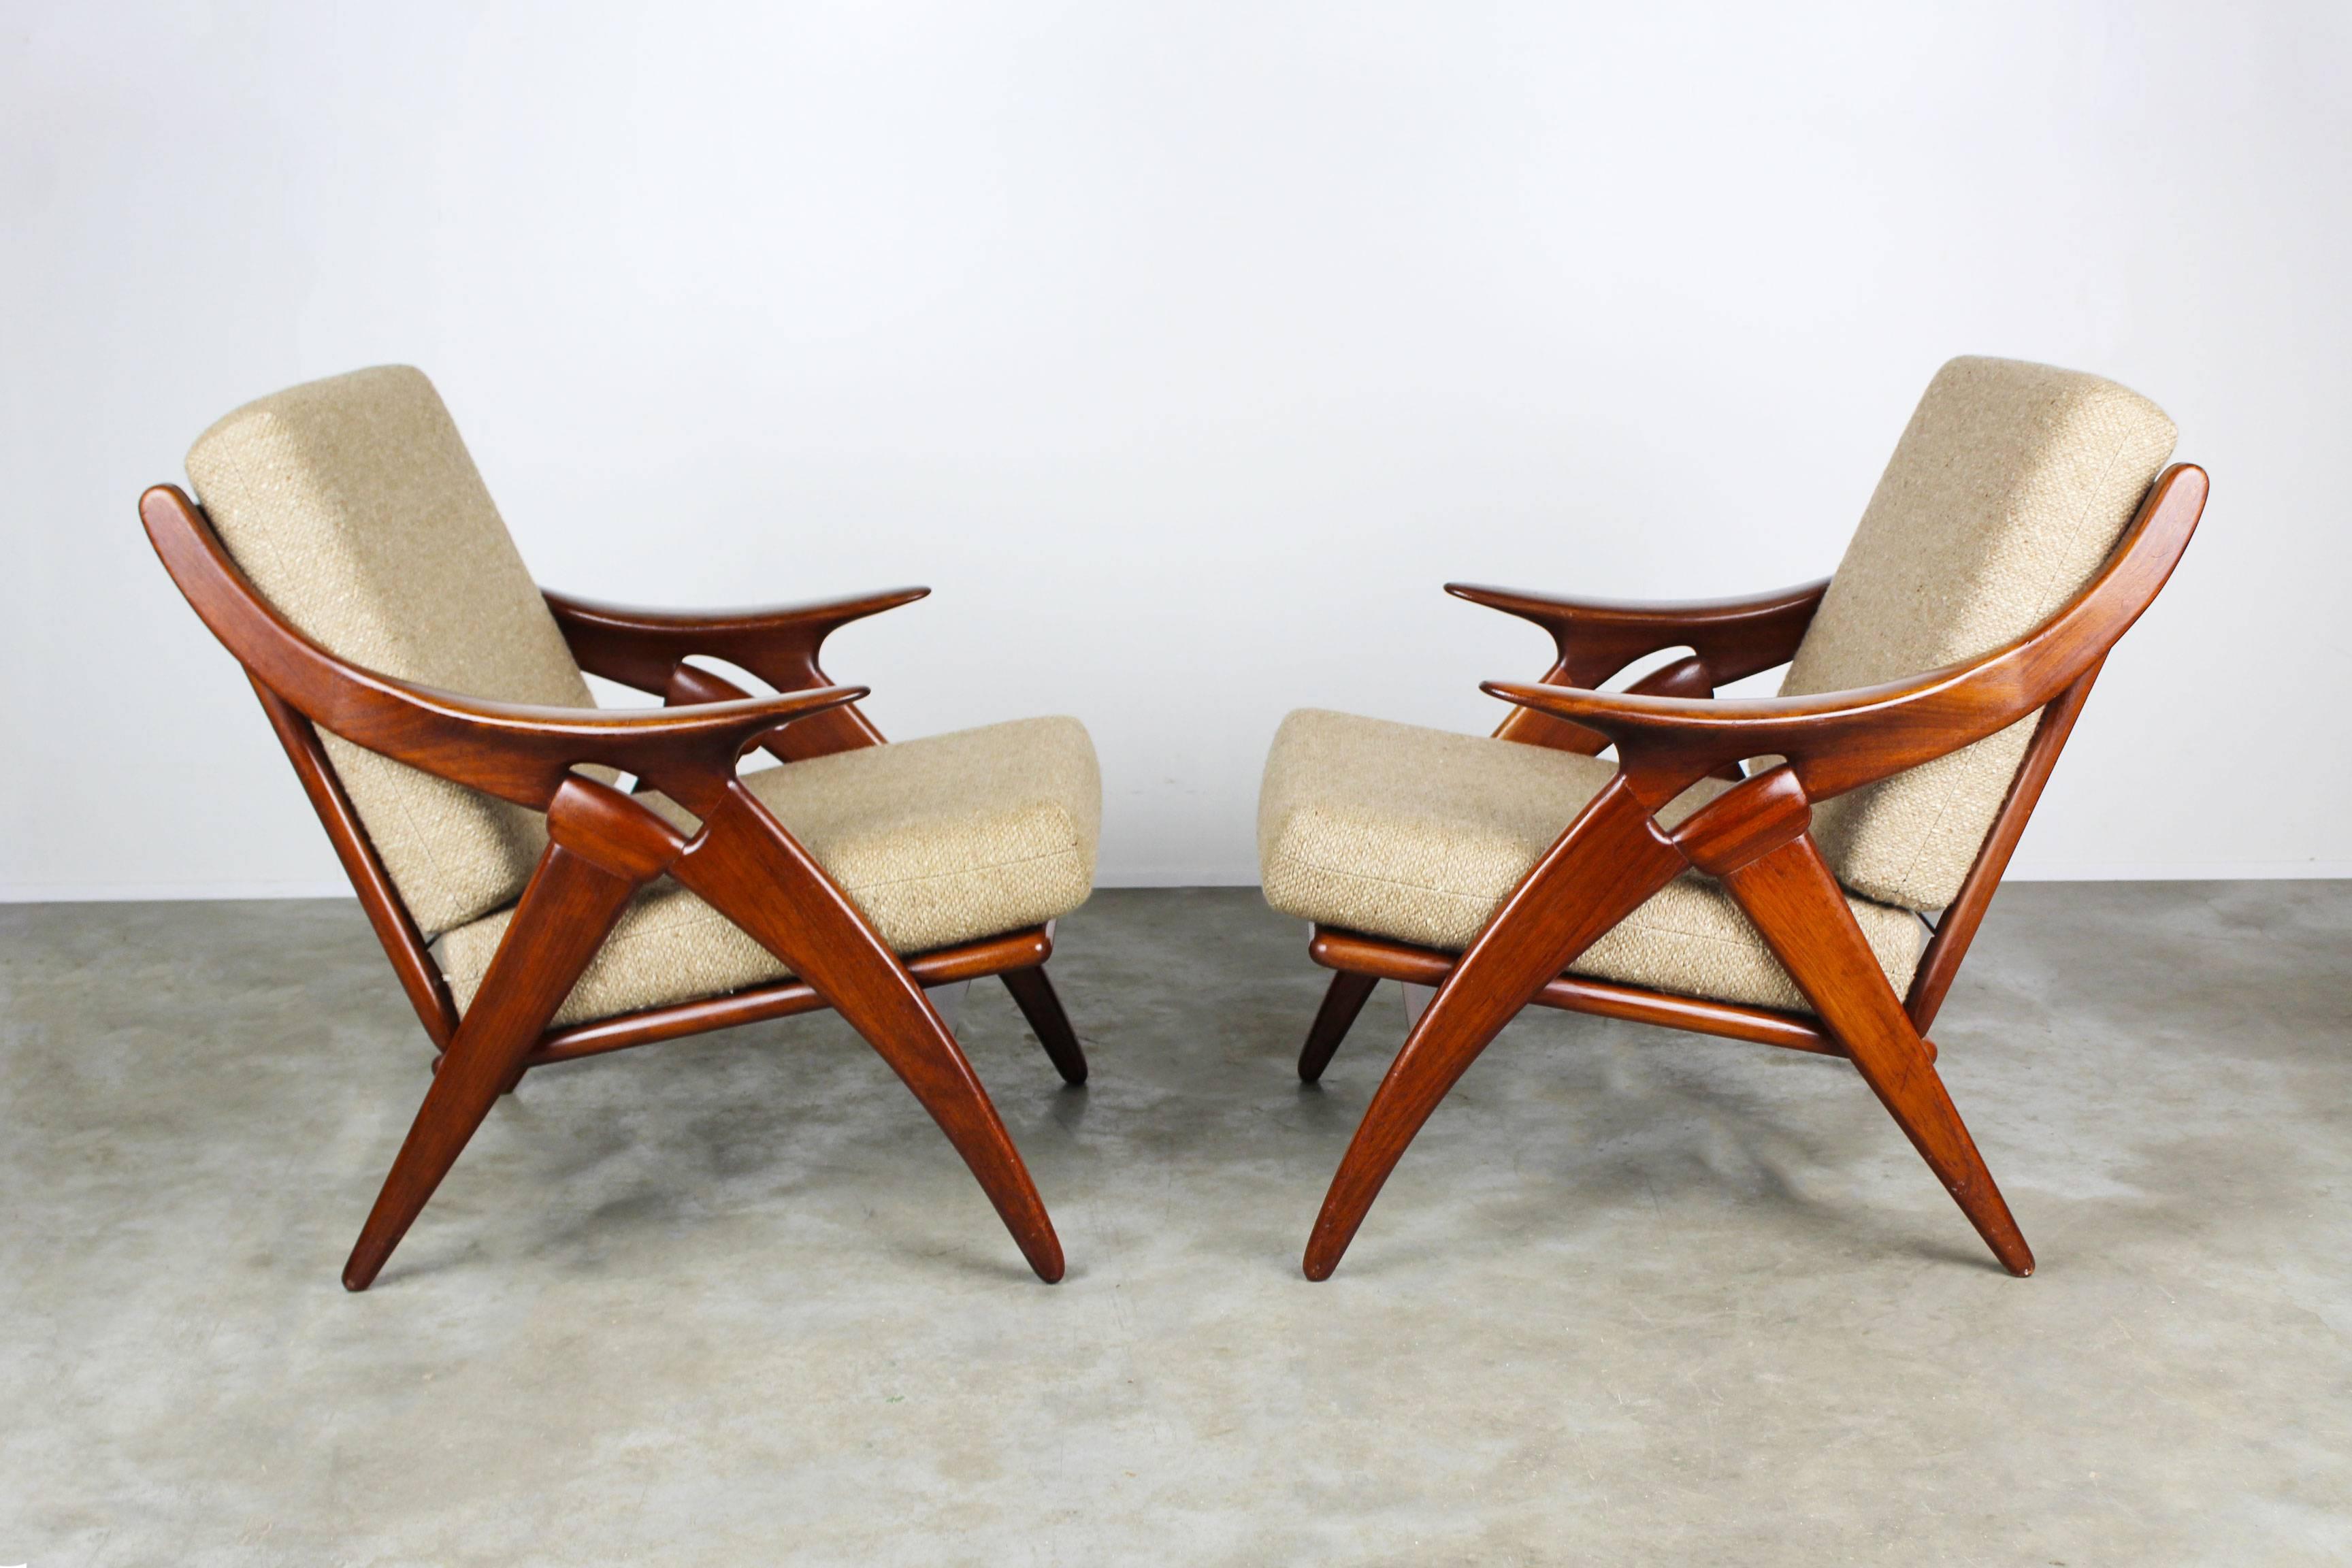 Set of two "De knoop" lounge chairs Dutch midcentury design by: De Ster Gelderland. The chairs are named "The Knot" refering to the unique teak shaped frame. The frame is made from solid teak and its shape always grabs your